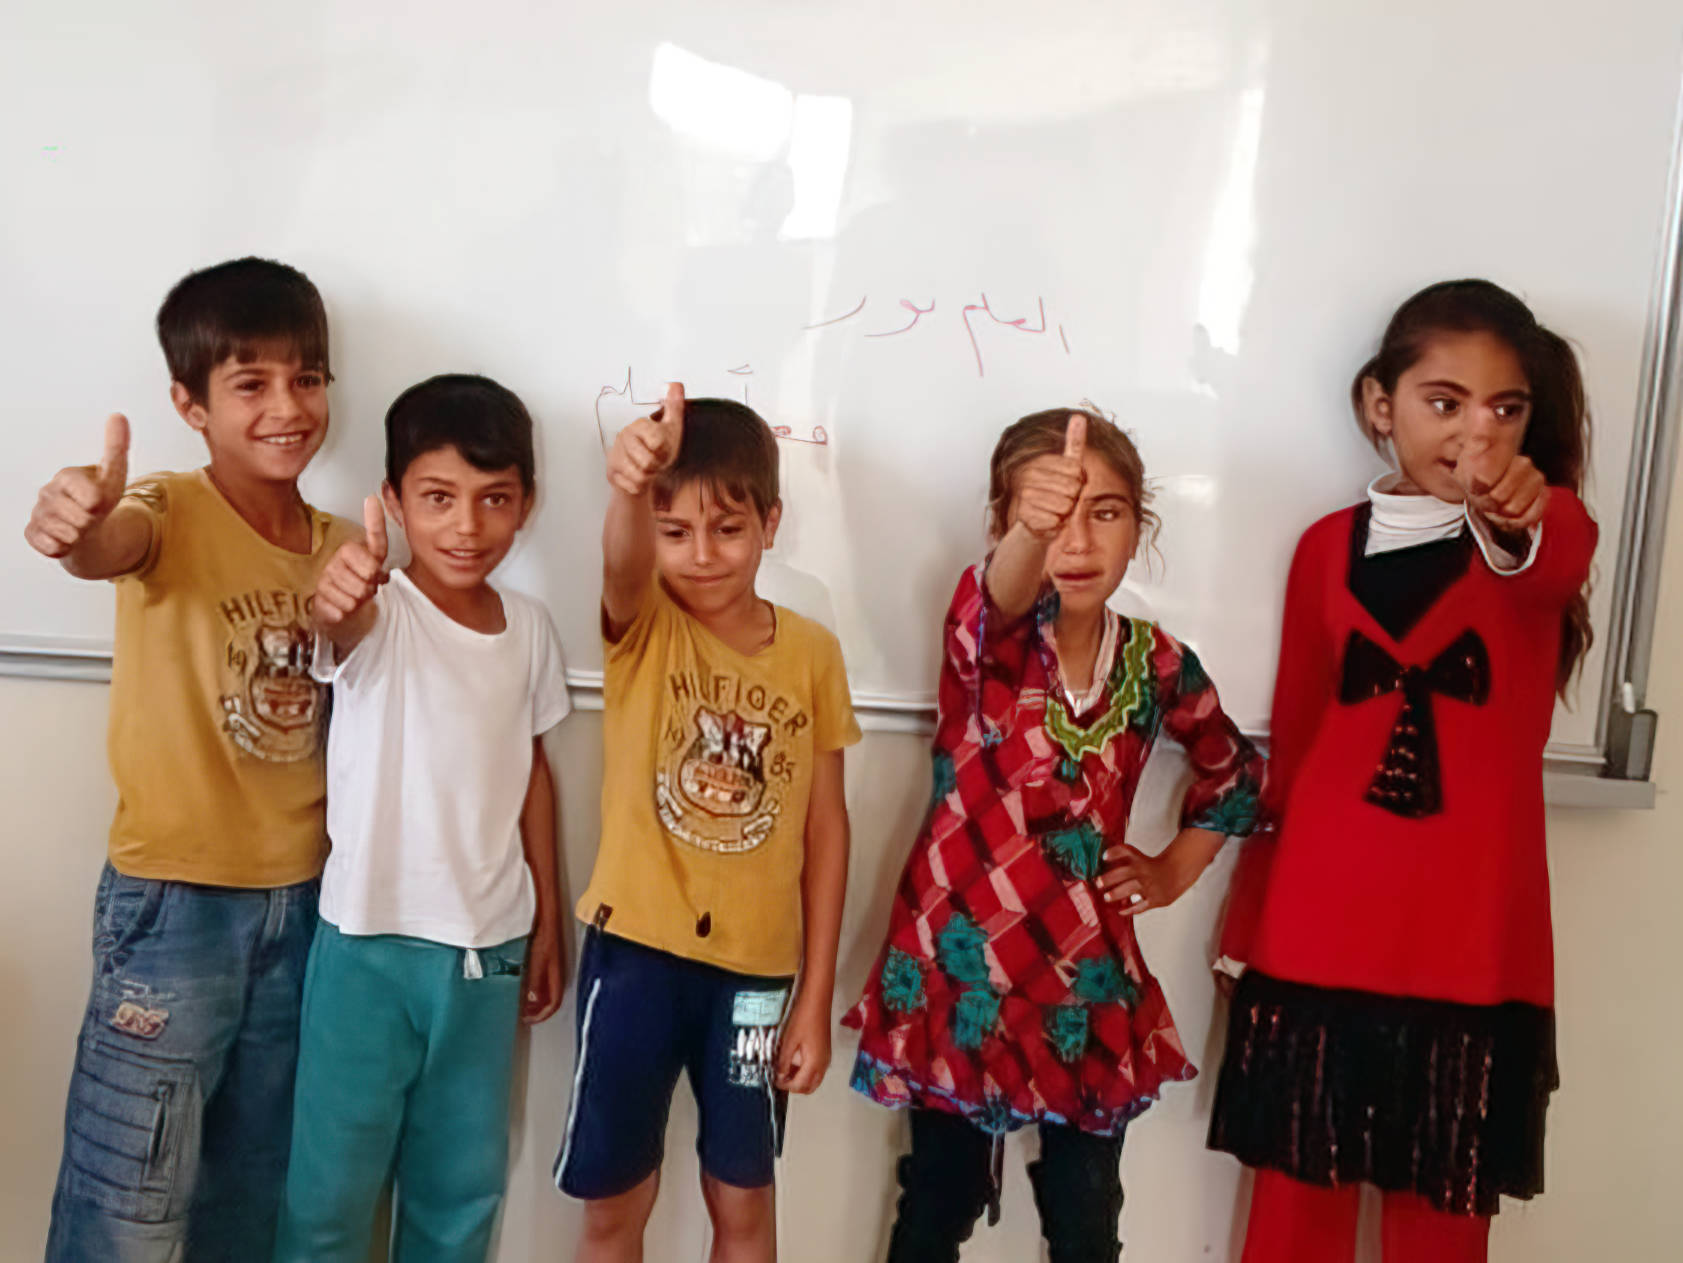 5 Primary school age children in front of whiteboard